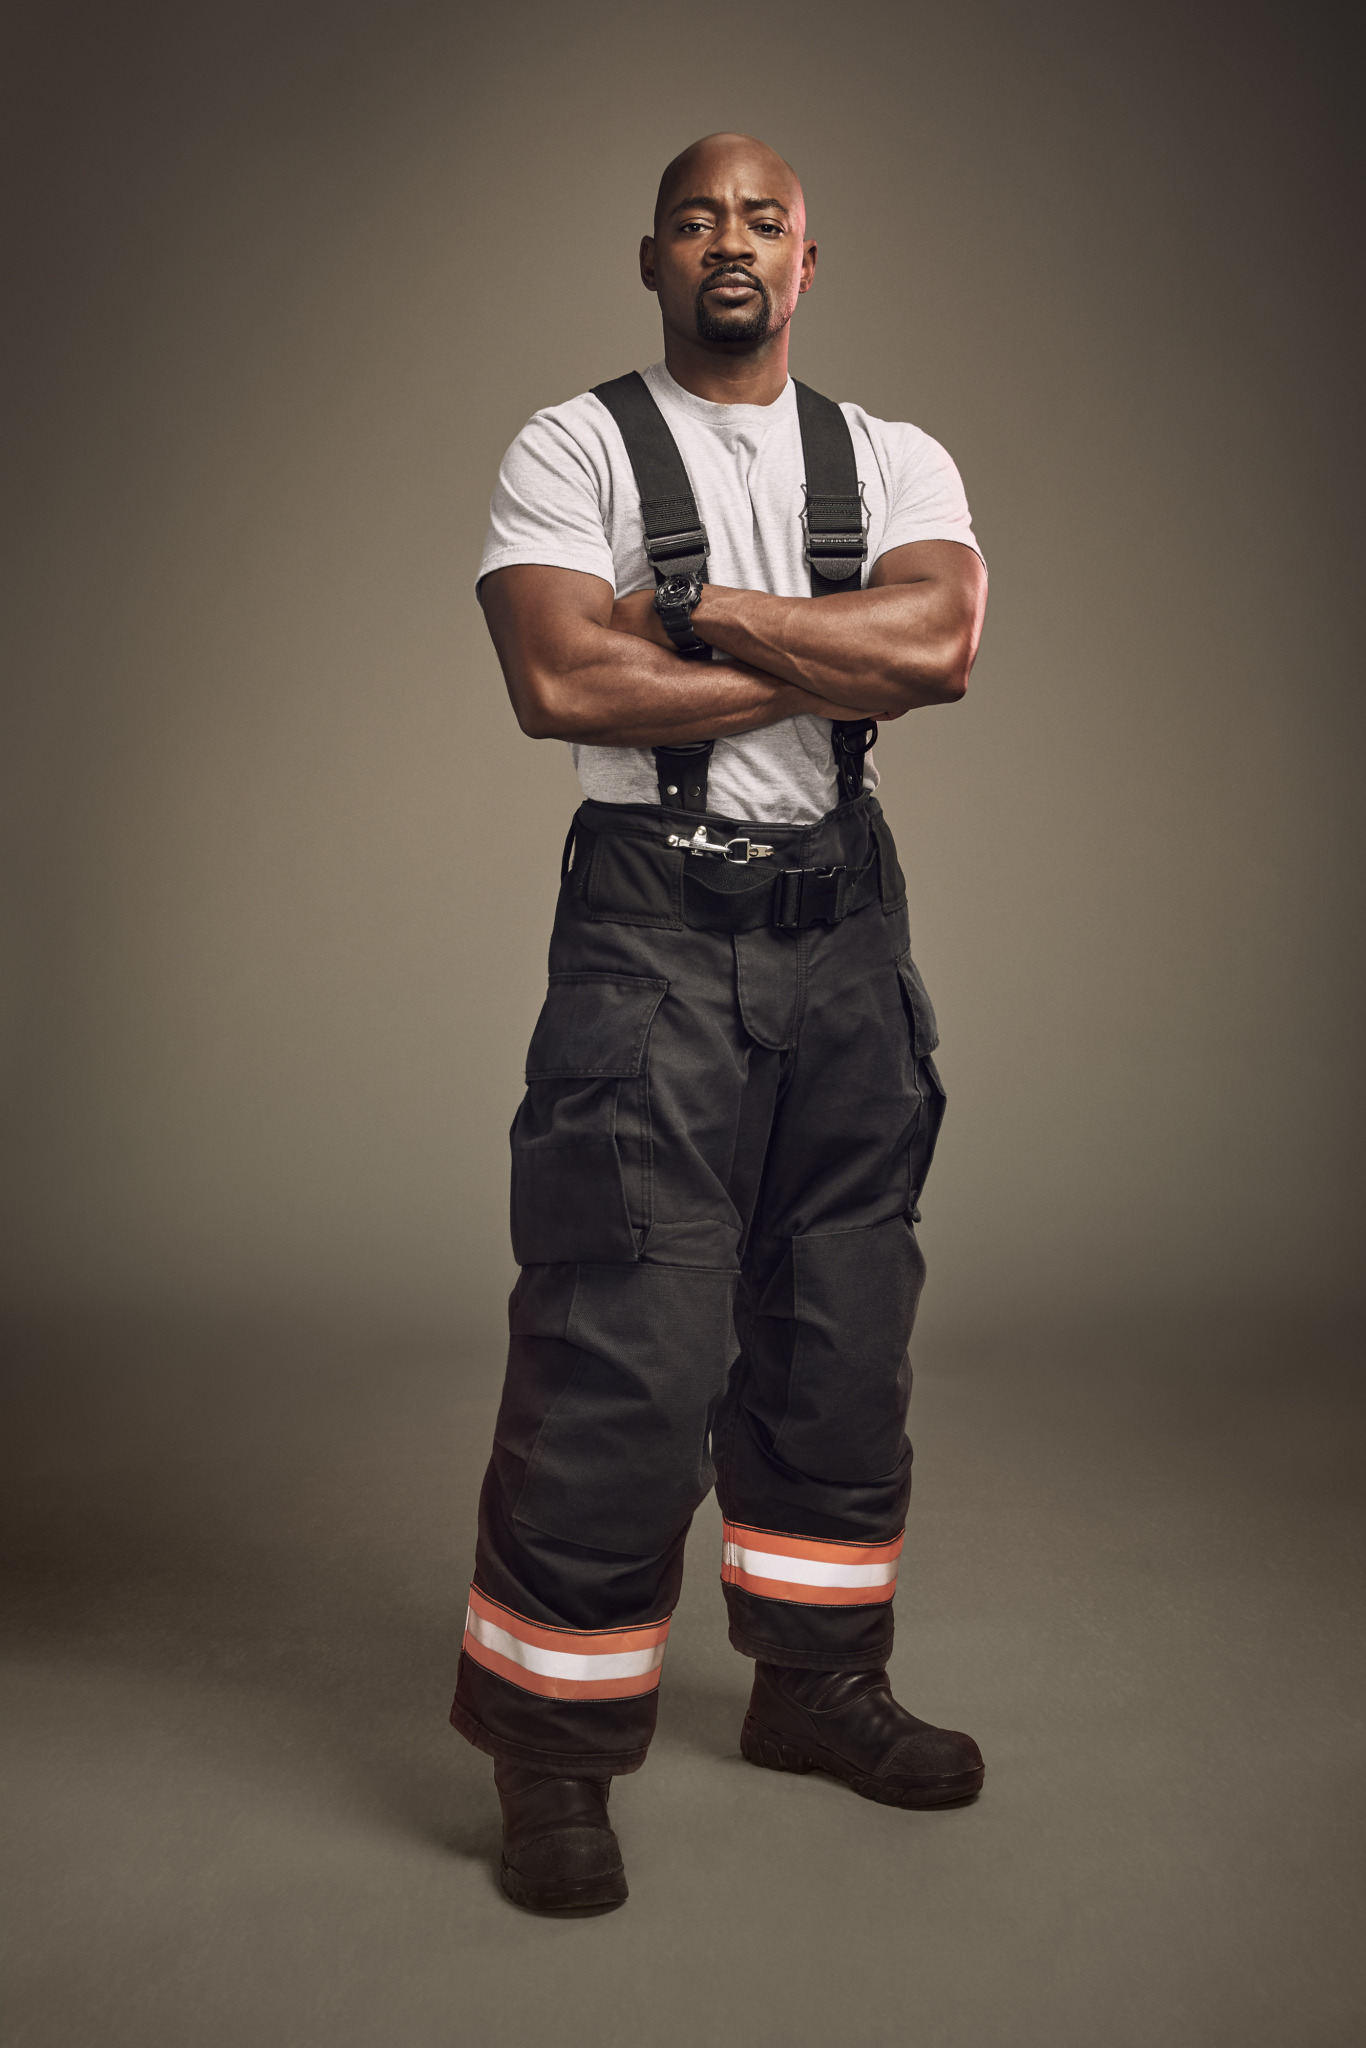 Brian Michael Smith, seen in his firefighting gear.